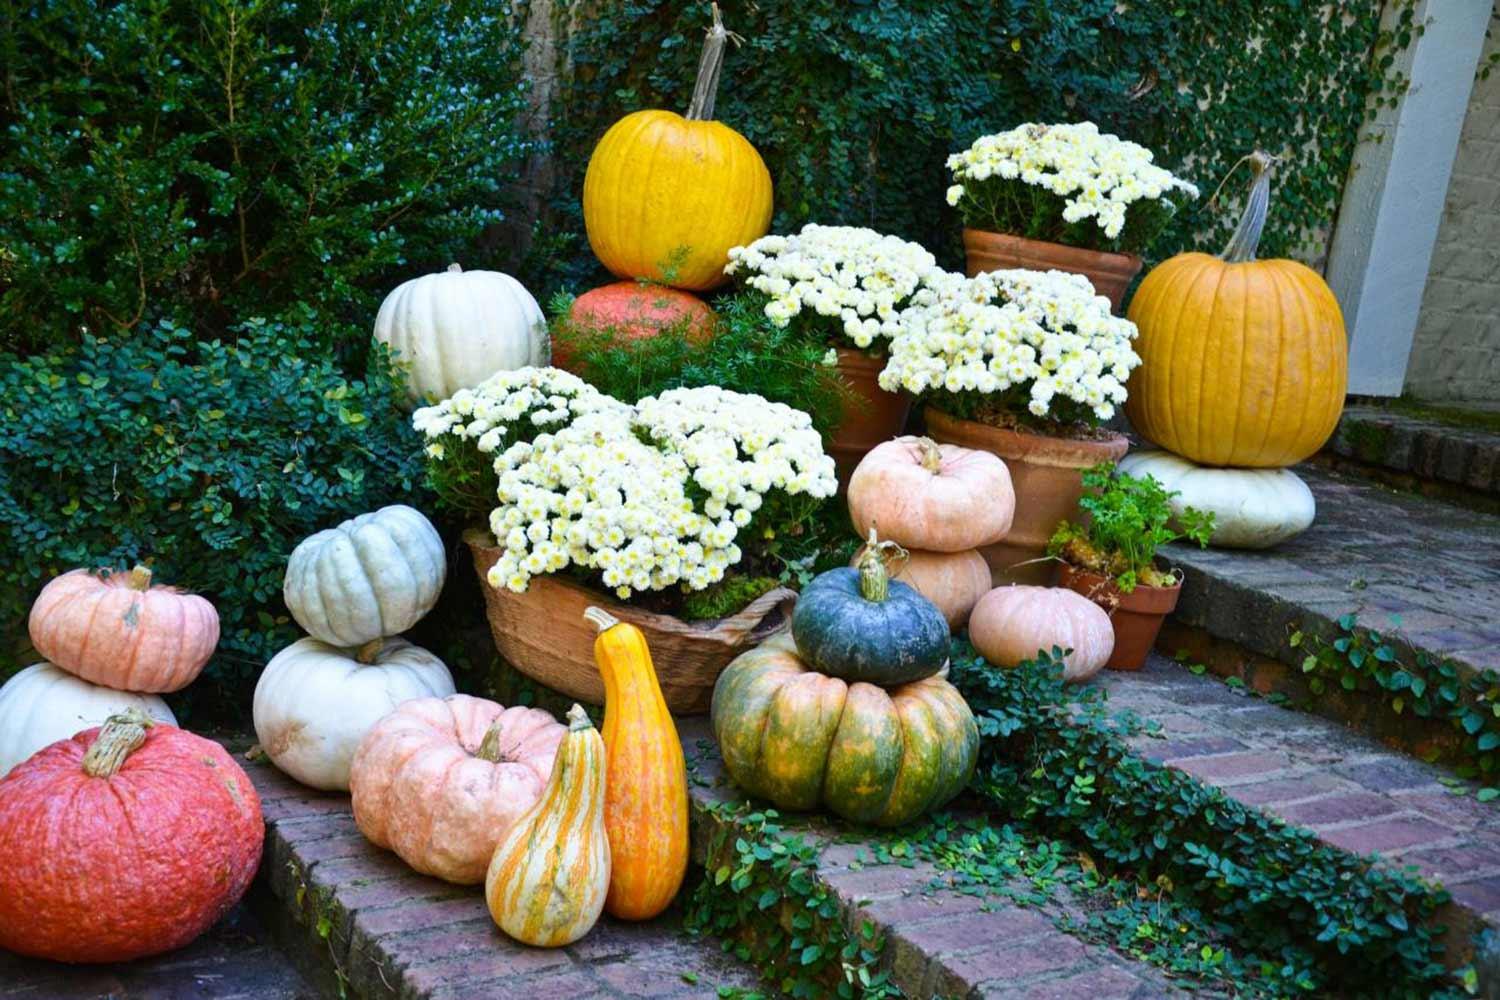 stacks of gourds and mums on brick font steps